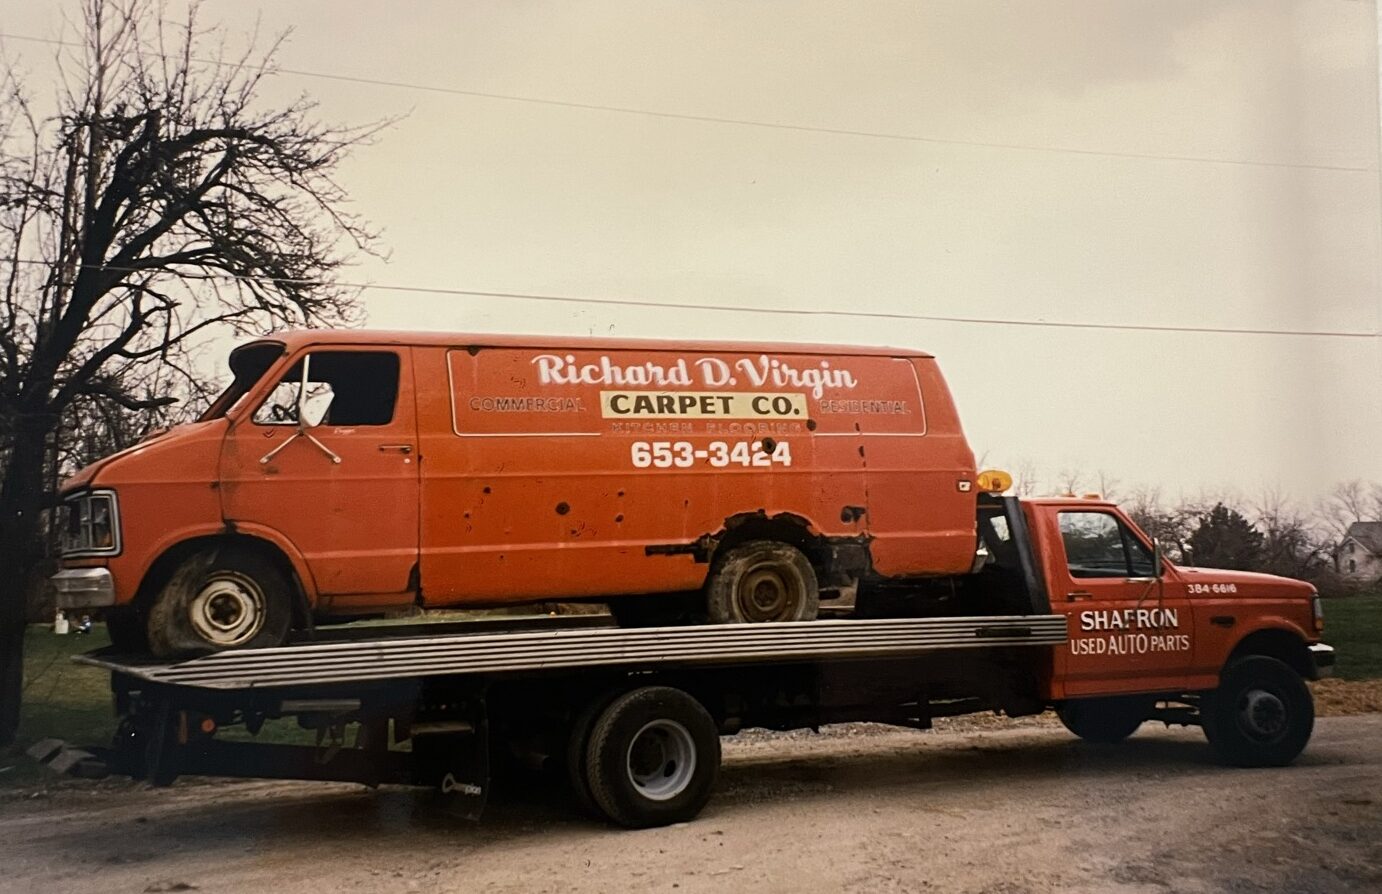 The first Virgin Carpets truck - we drove it till it was in pieces!